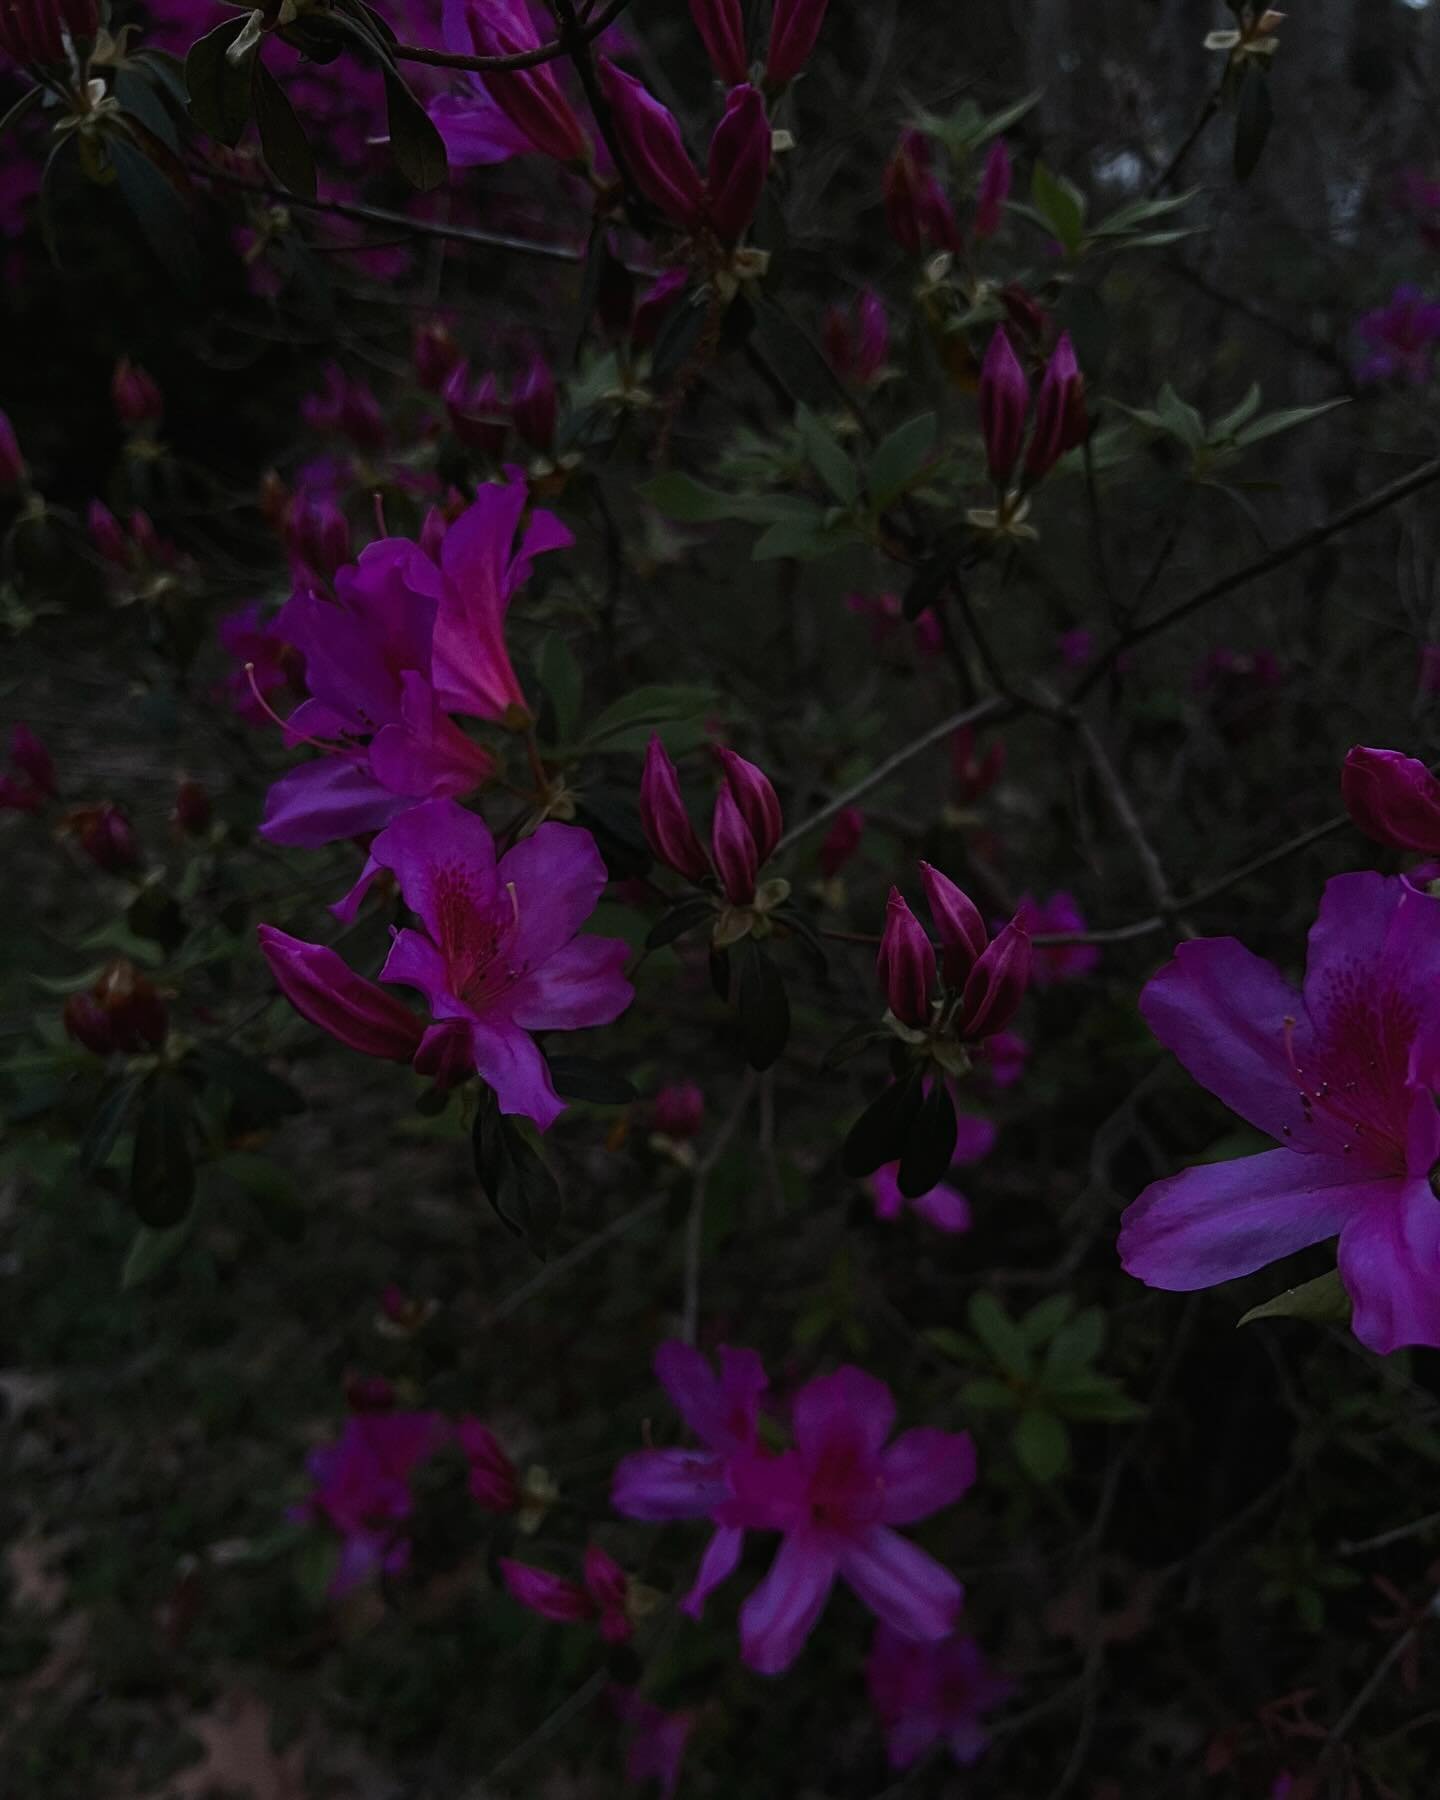 ◑ last month lights / recalibrations mostly in the country : azalea season, equinox moon + sunlight, violets, camellias, arnaudville bayou teche, music moment with syd